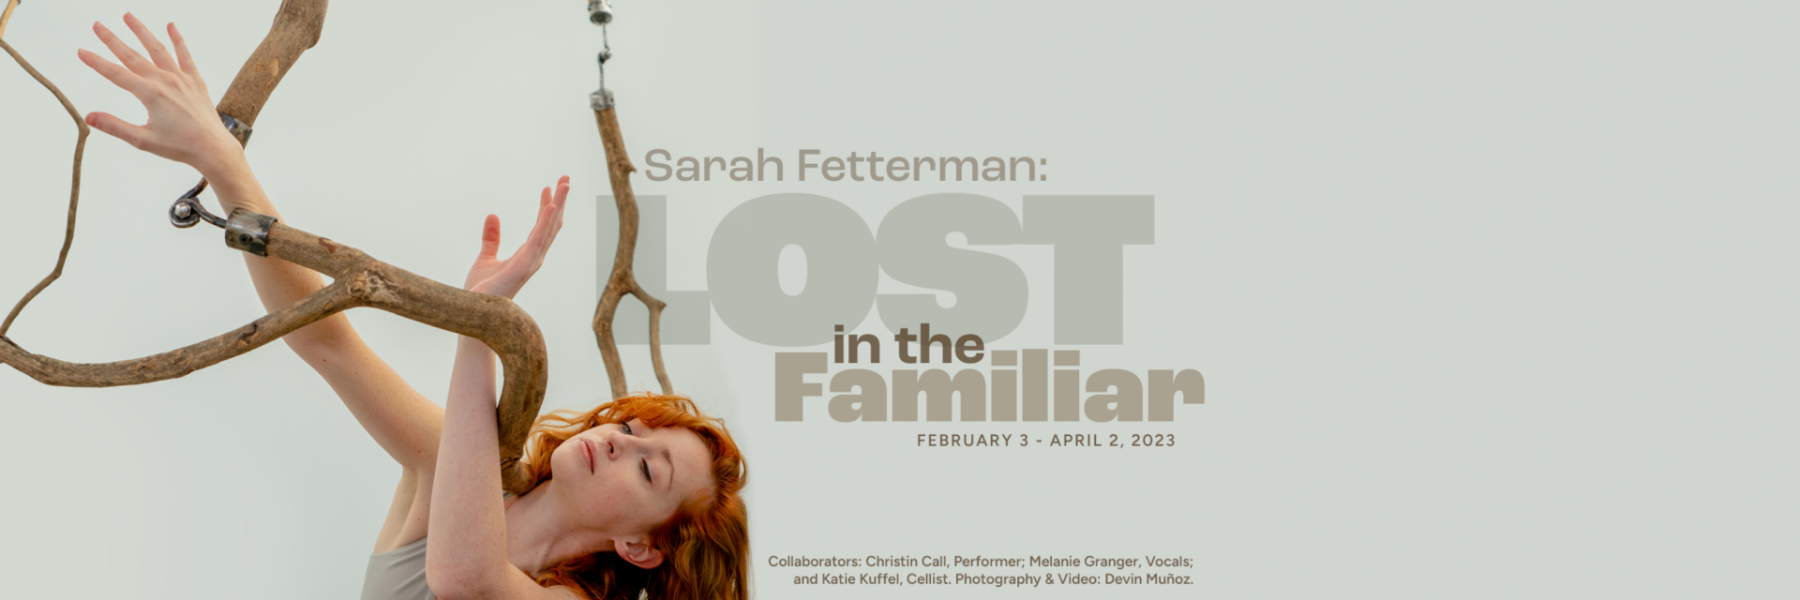 Gallery 1 - Sarah Fetterman: Lost in the Familiar Performance